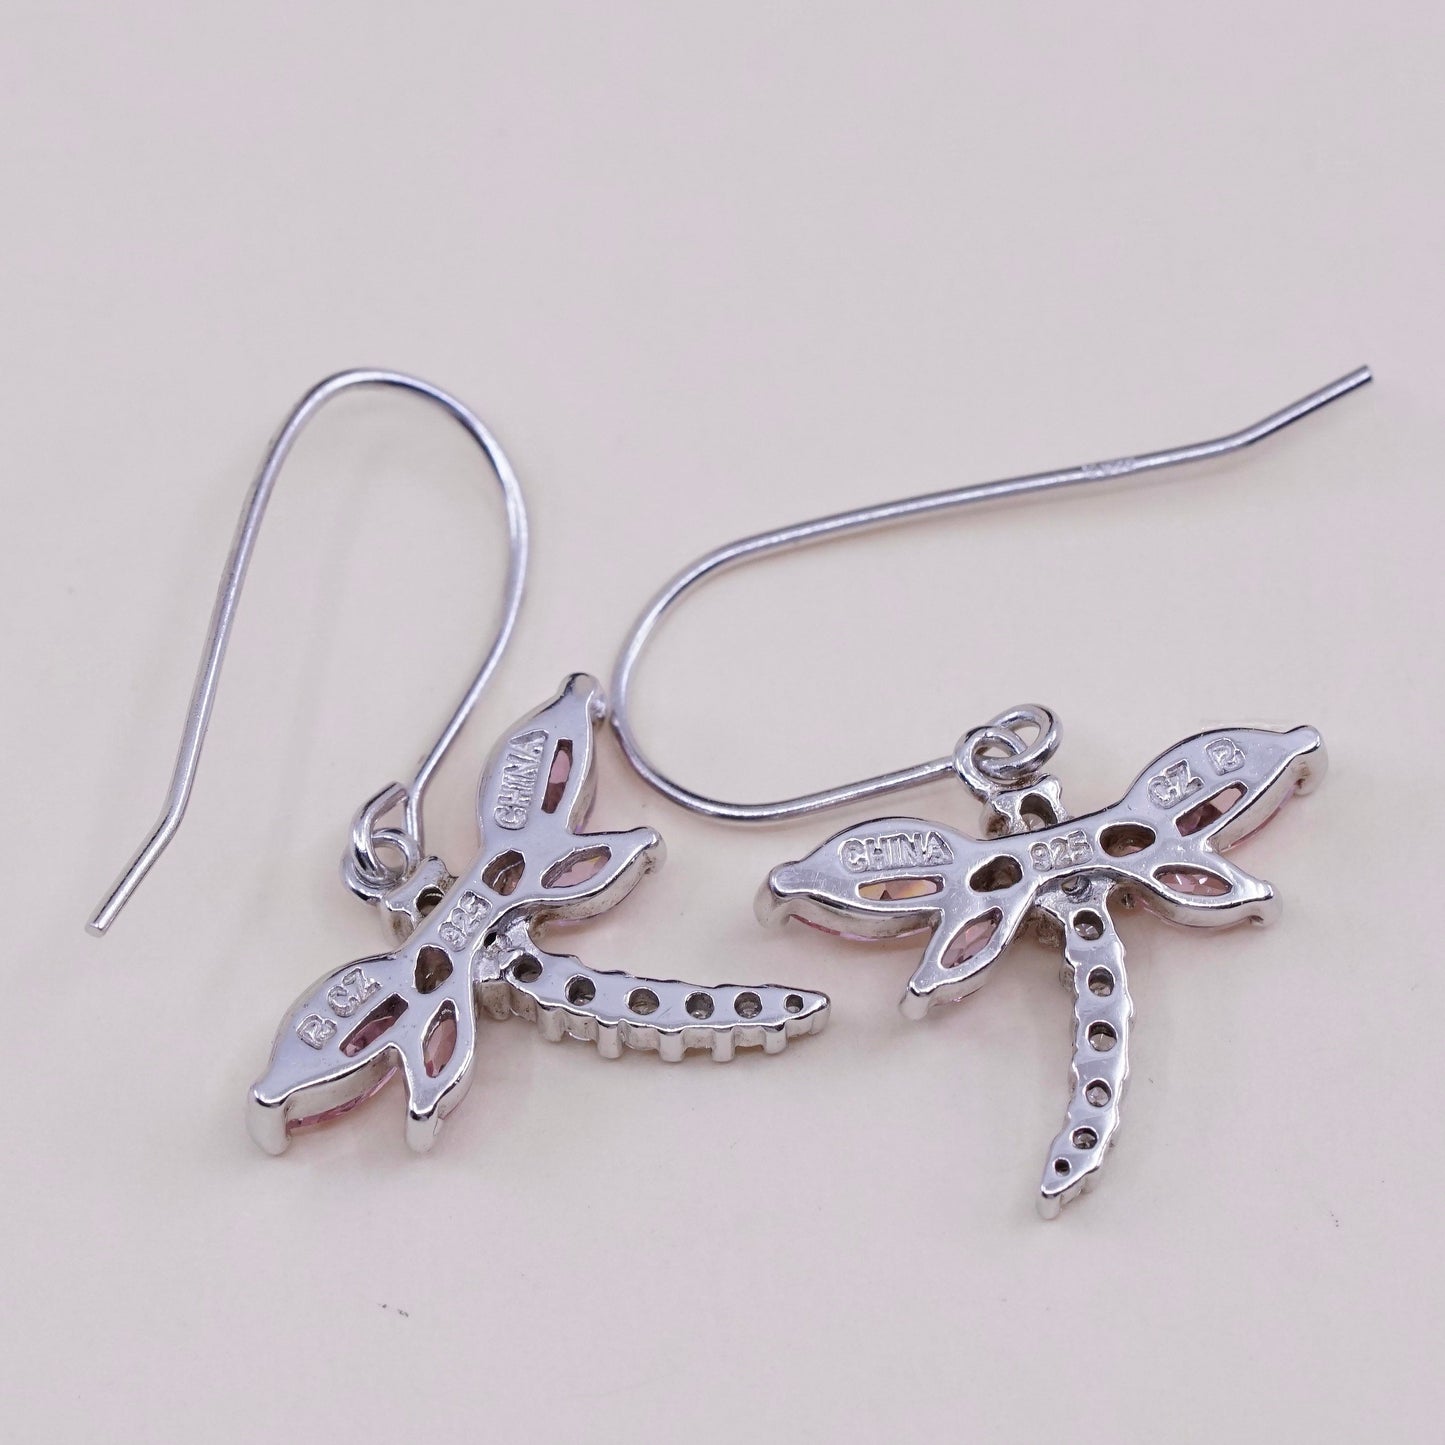 Vintage handmade sterling 925 silver dragonfly earrings with pink Cz